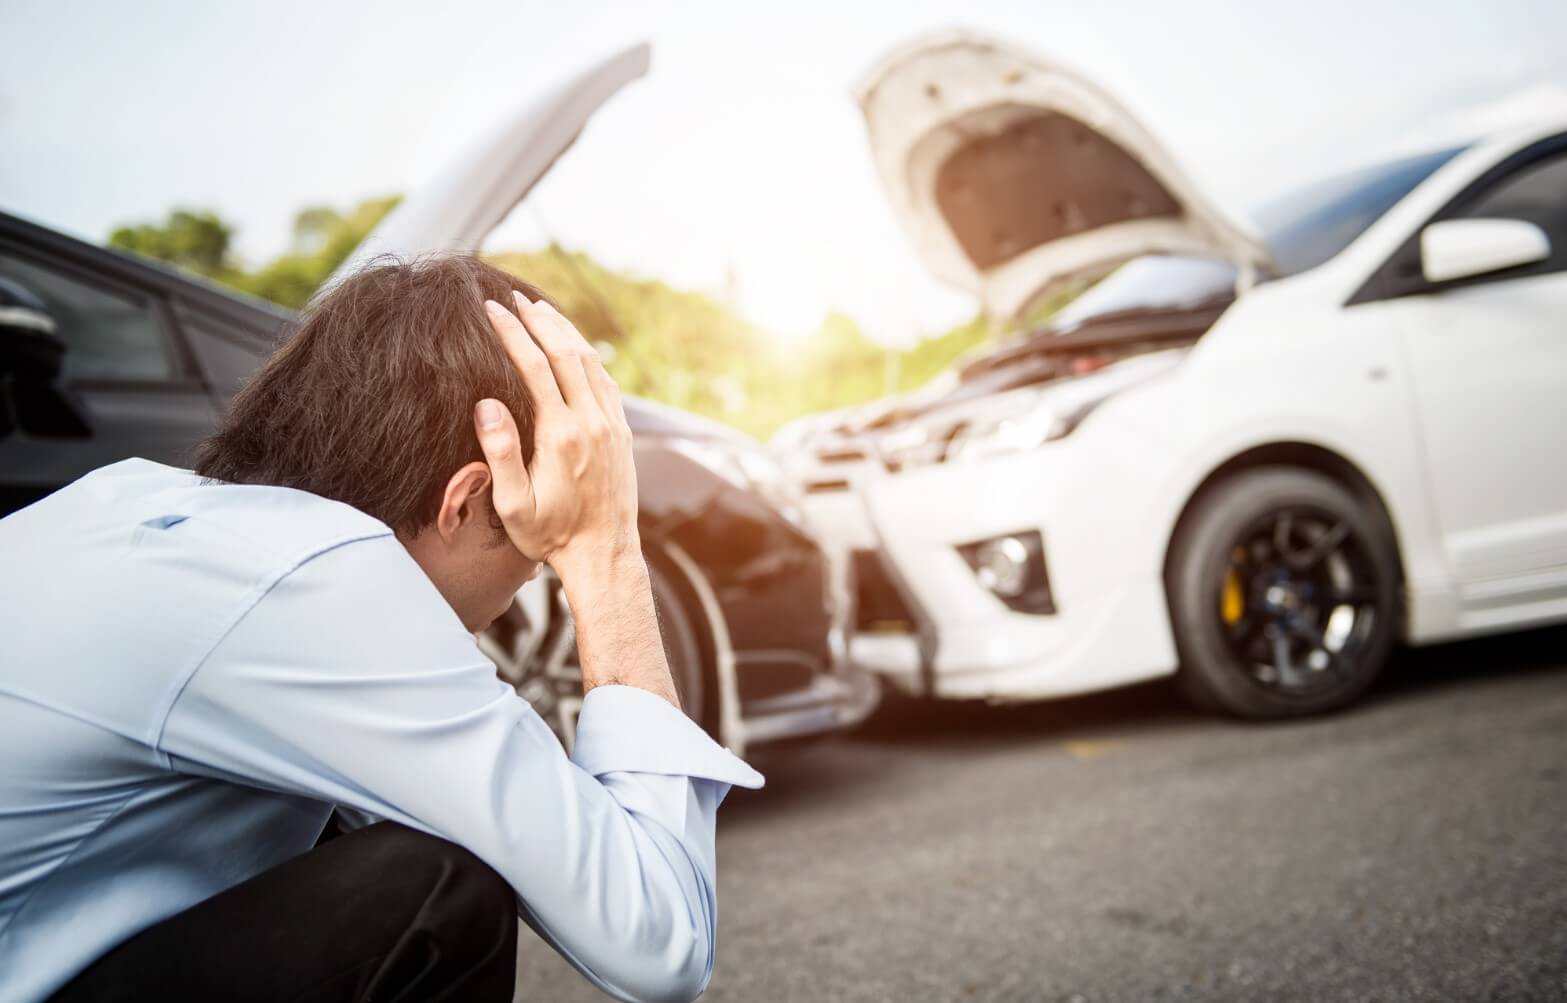 Car accident lawyer in Orange County.